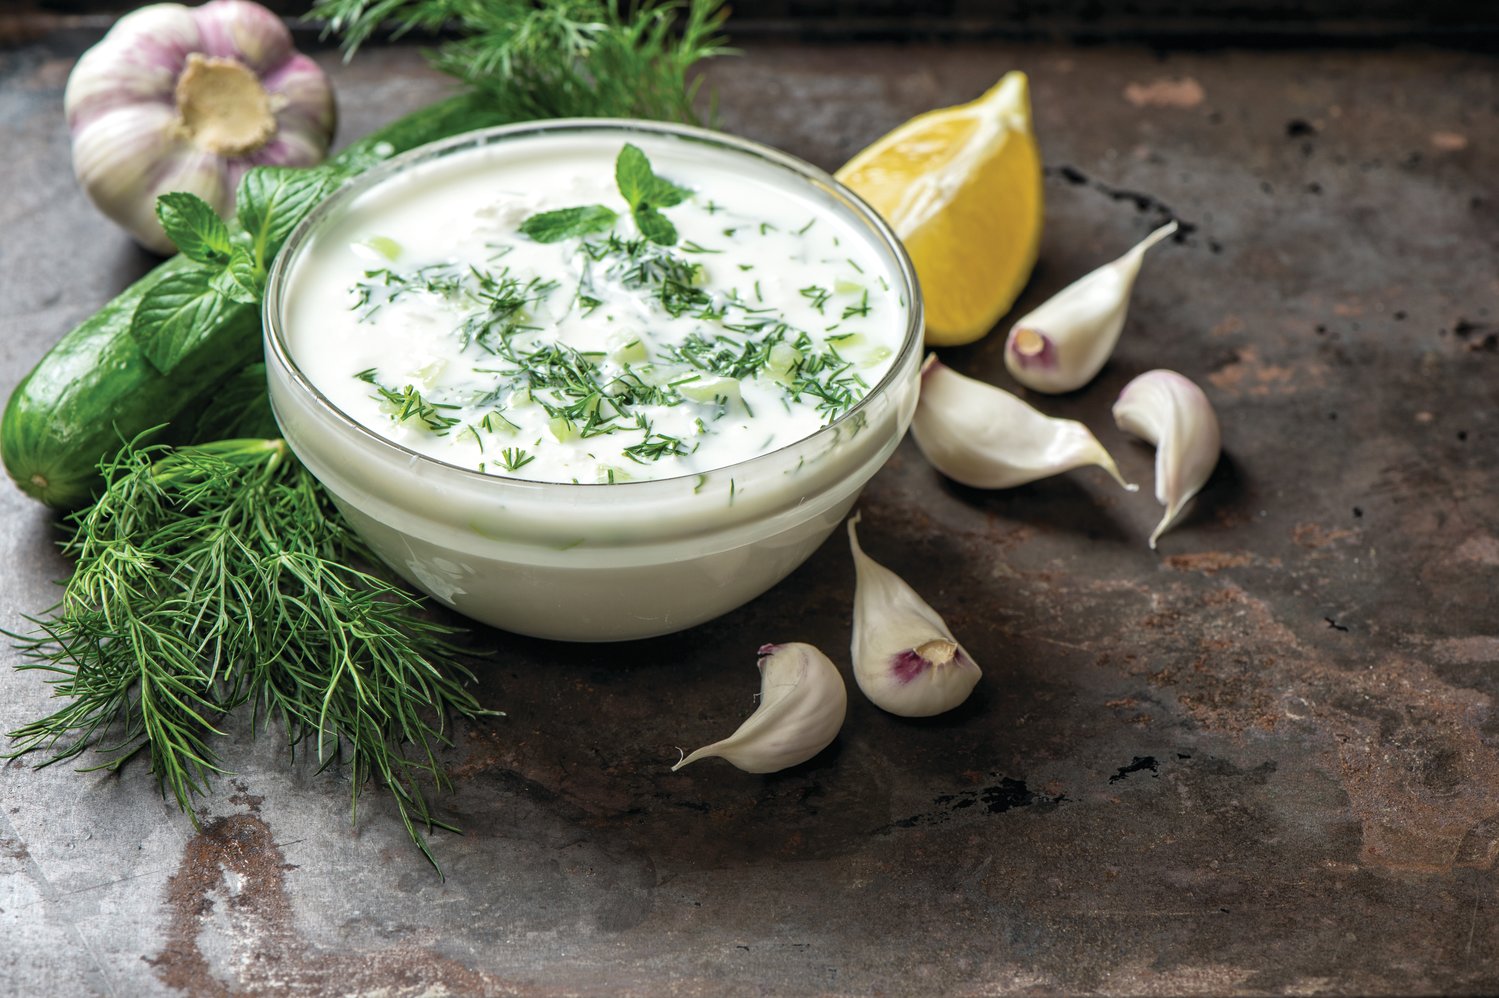 Tzatziki is Greek cucumber-and-yogurt sauce that is often served with grilled meats.